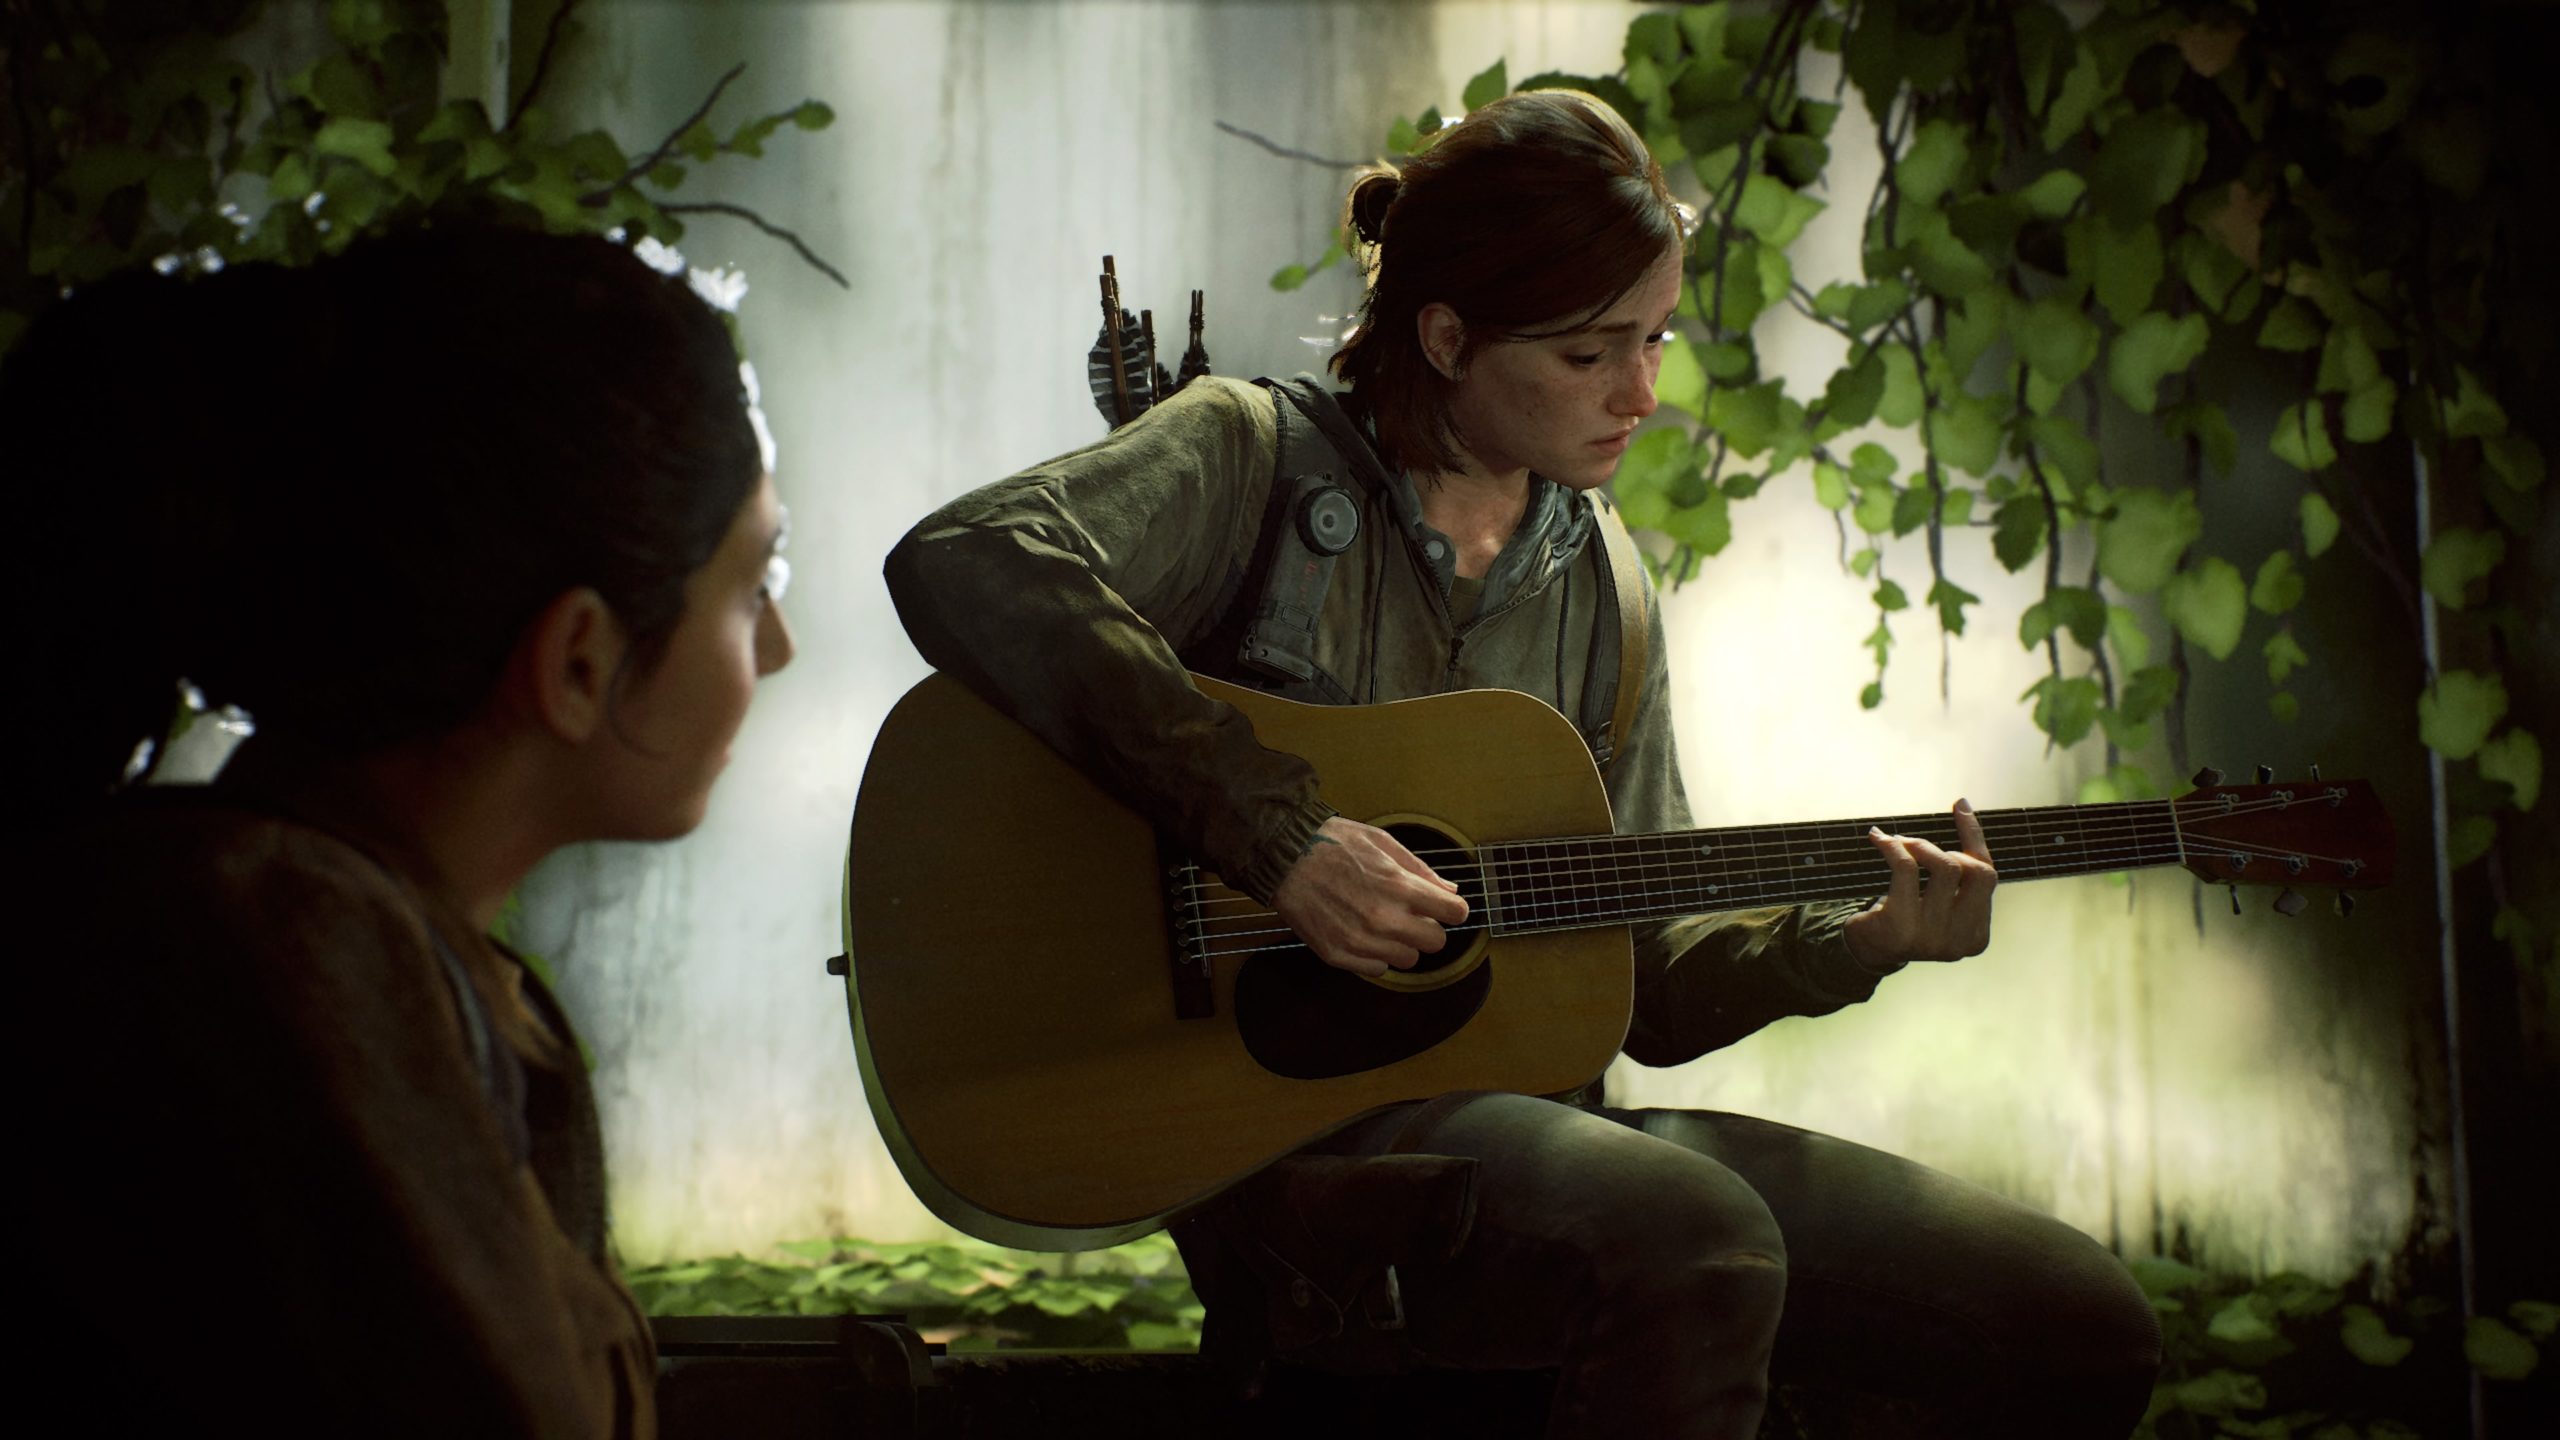 Ellie sitting playing a guitar while Dina looks at her from the ground to the left